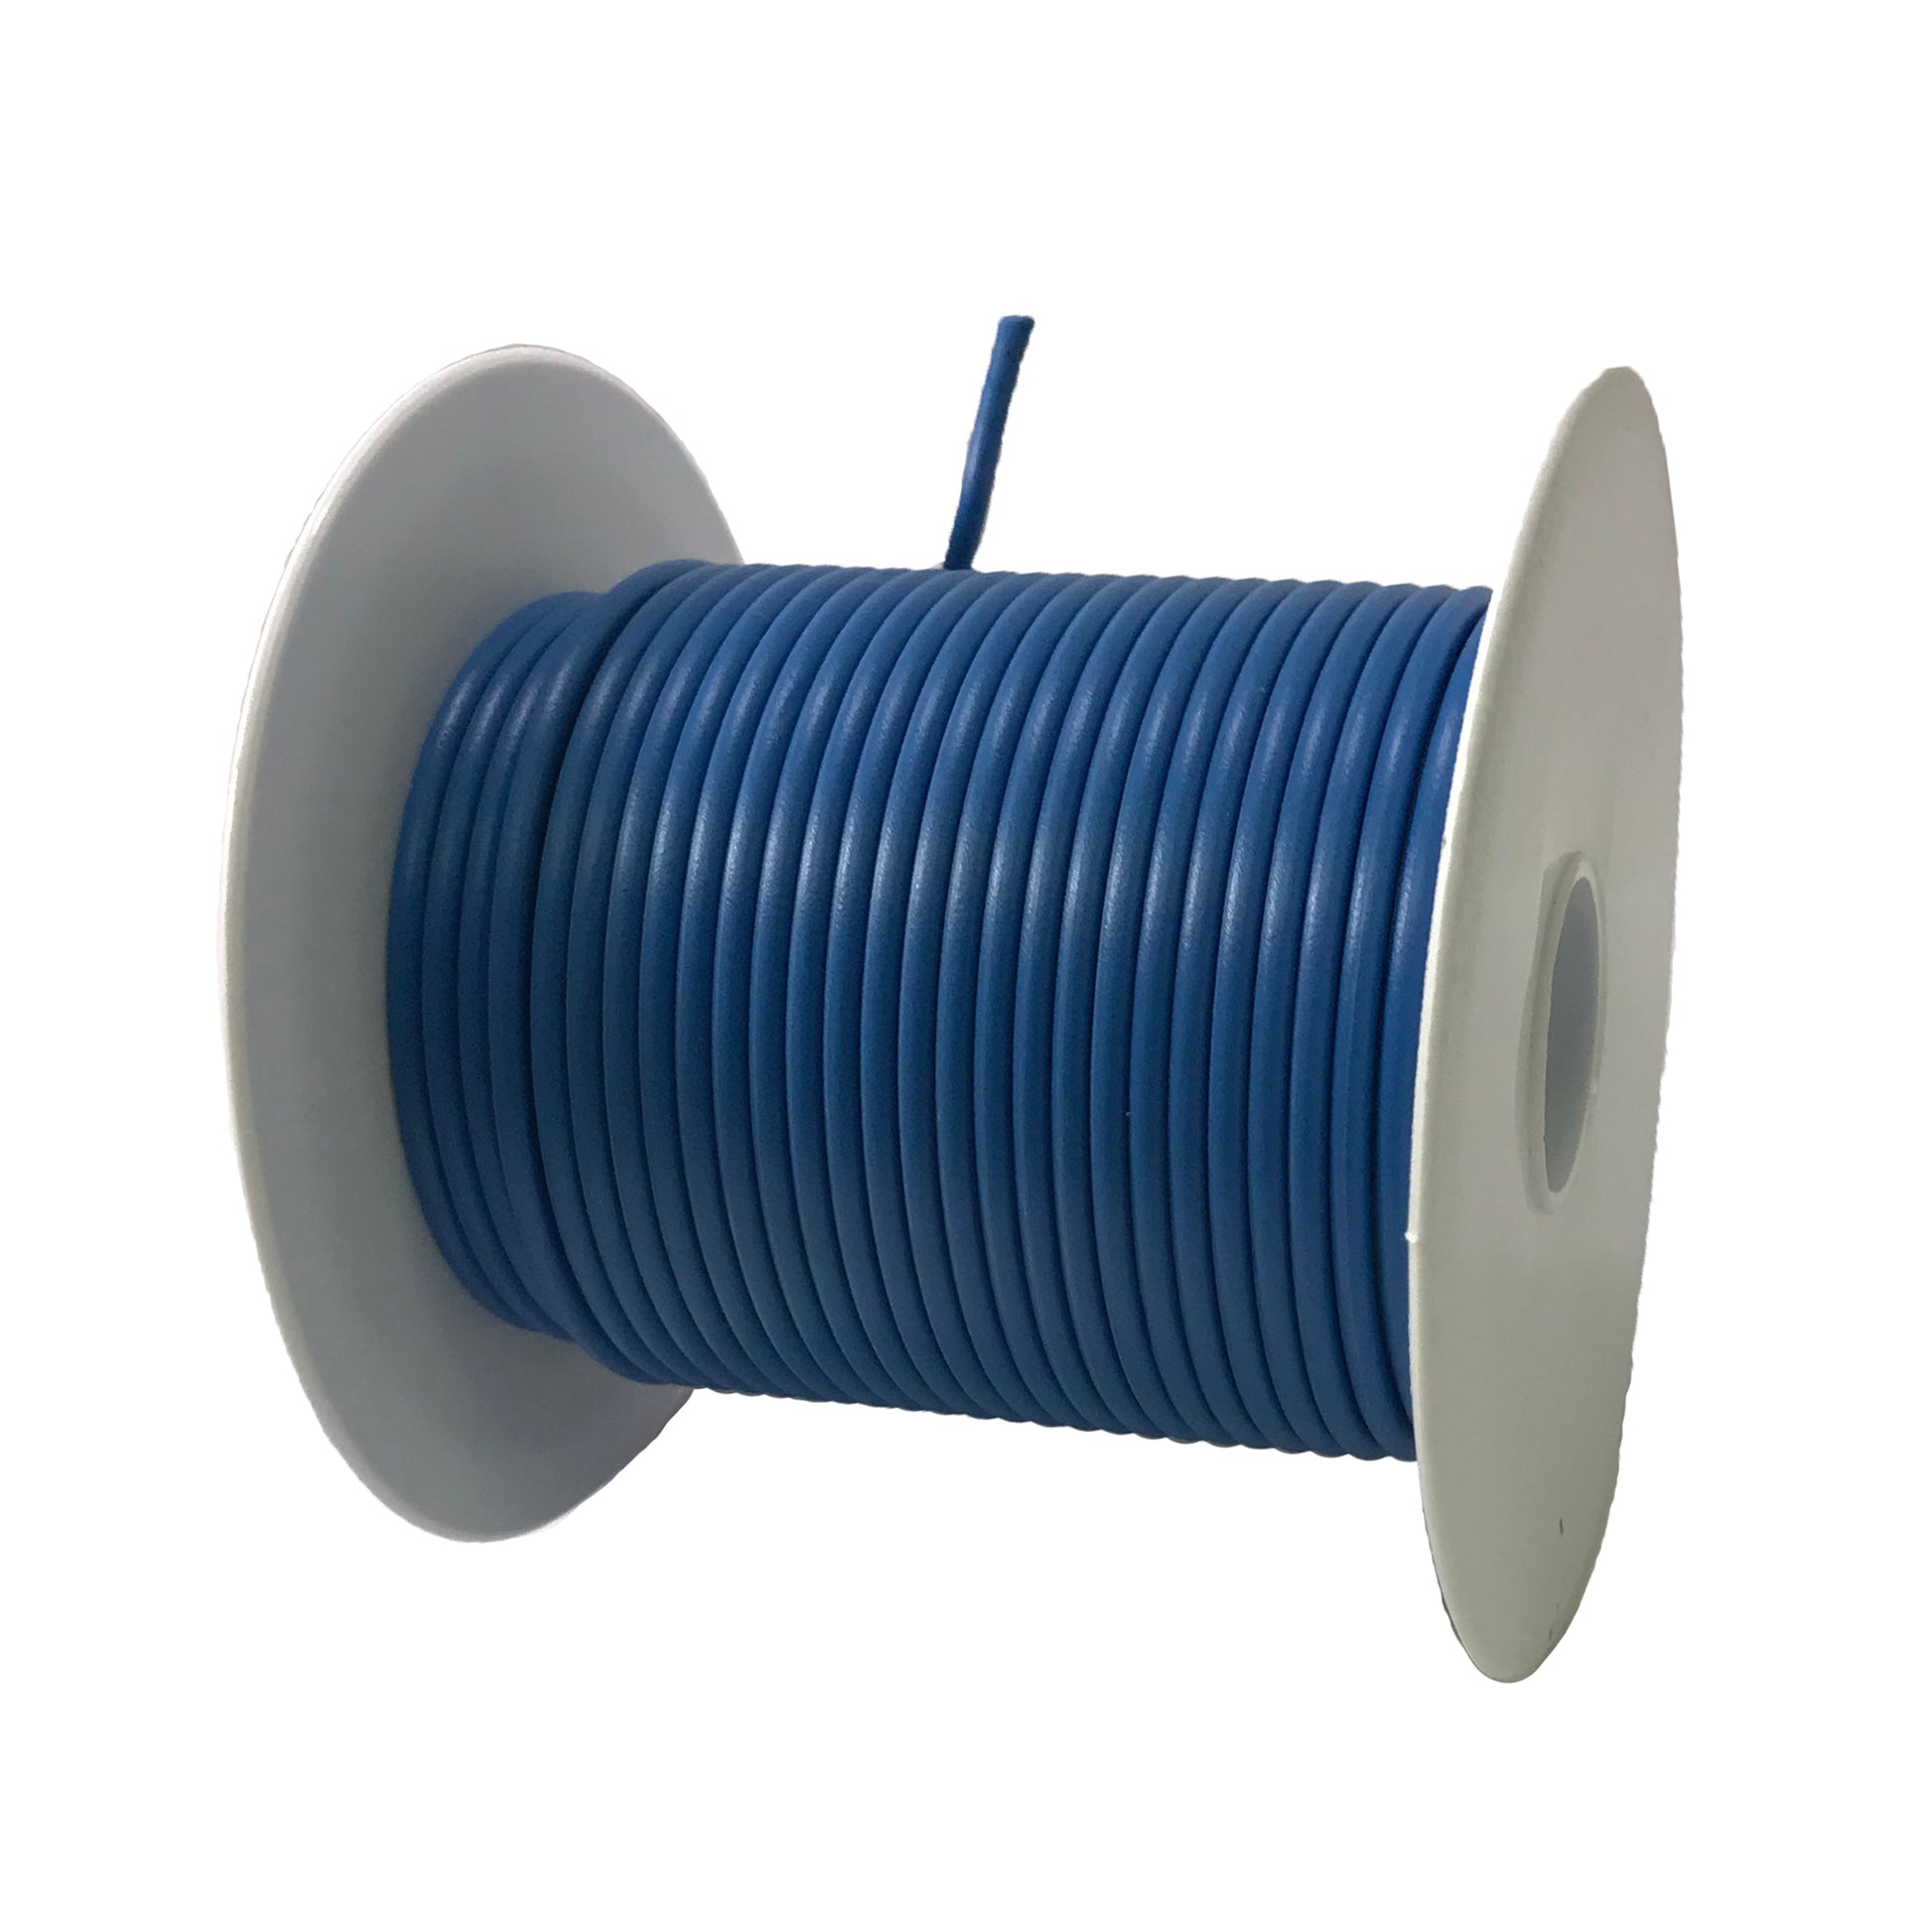 20 Gauge Blue Primary Wire - 25 FT